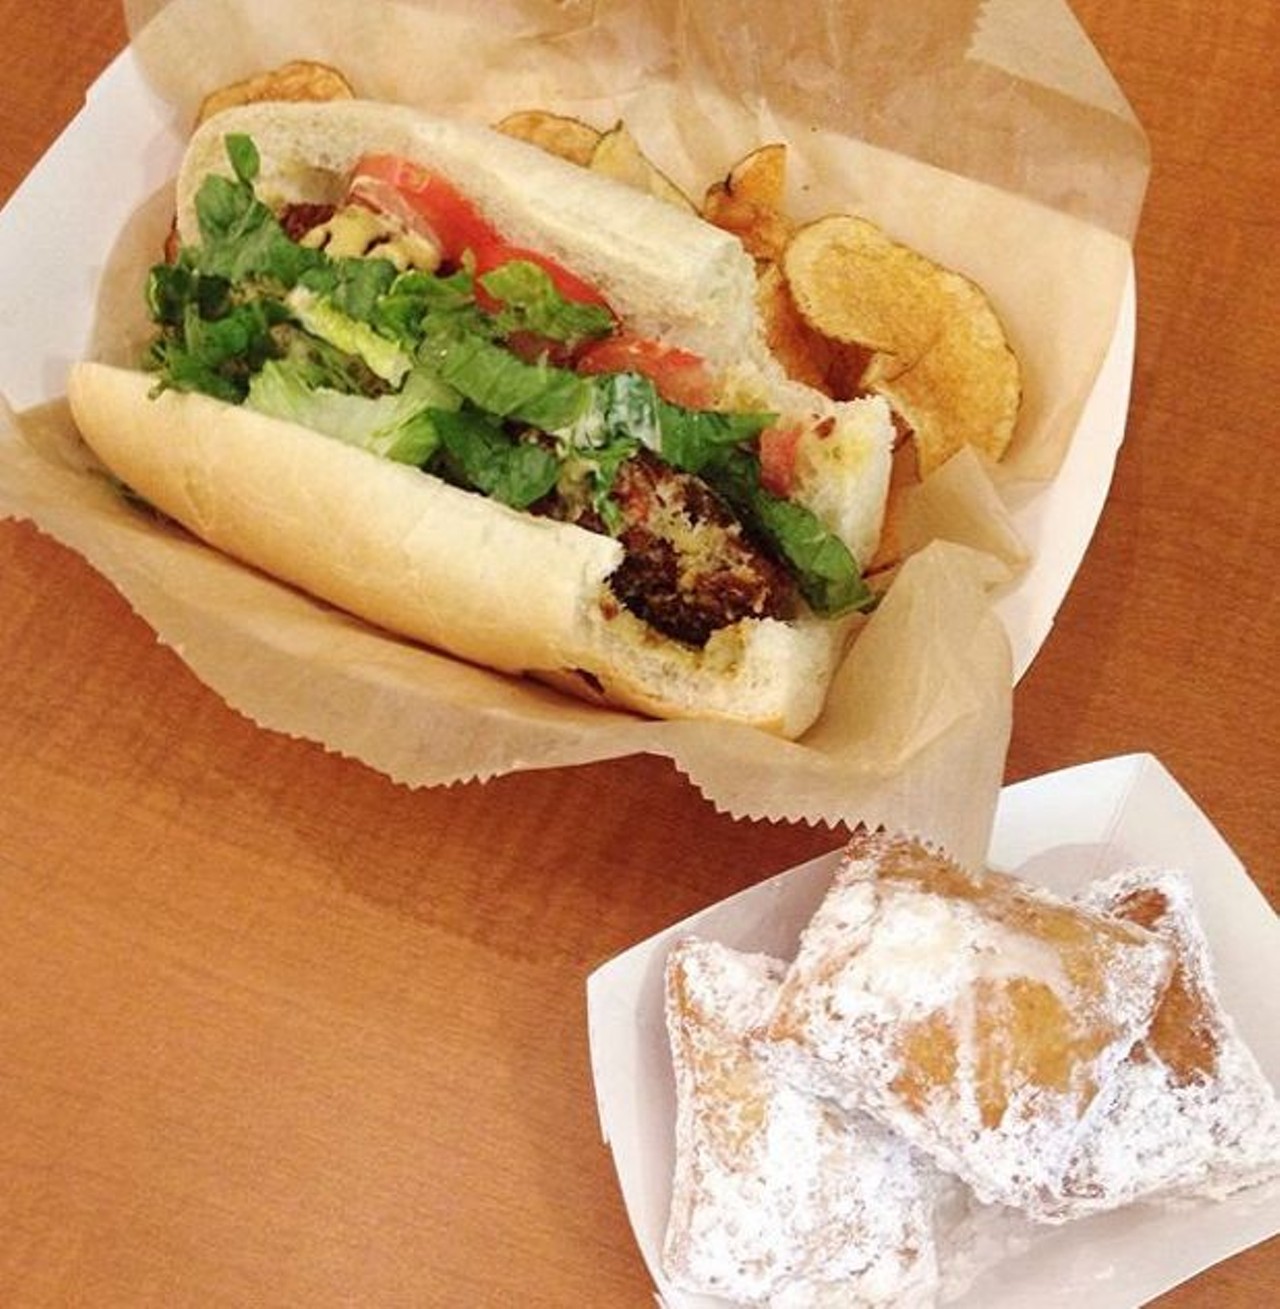 Here we have a crab cake po'boy and beignets. Suddenly we're really hungry...Photo courtesy of Instagram / sydbecker.